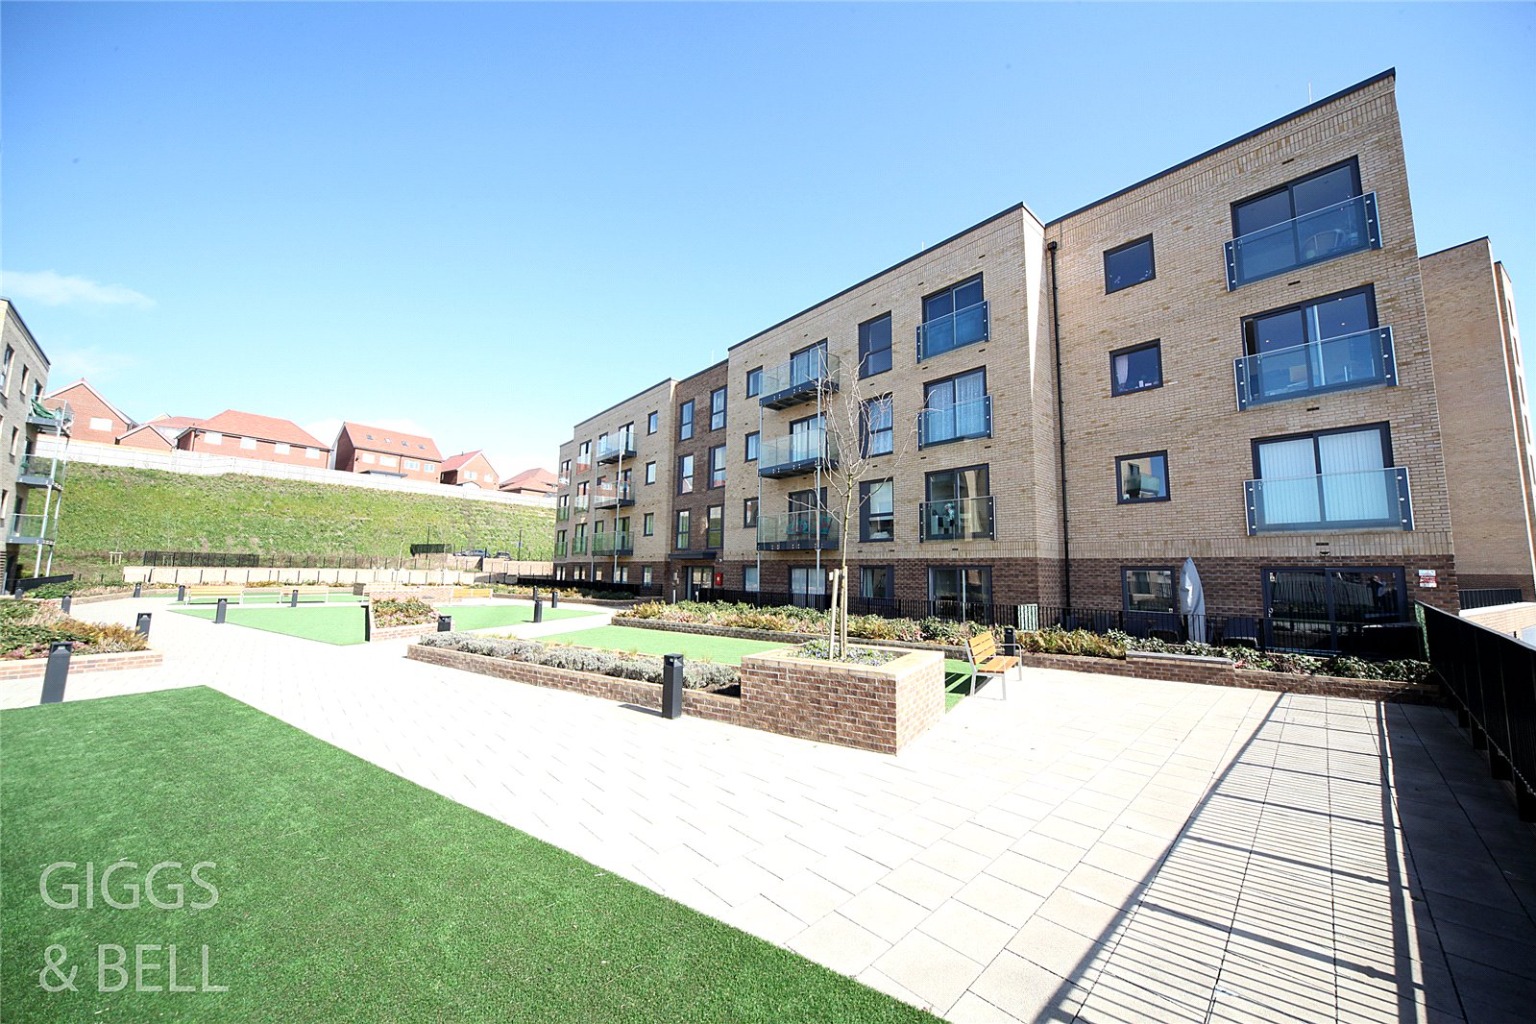 2 bed flat for sale, Luton, LU2 